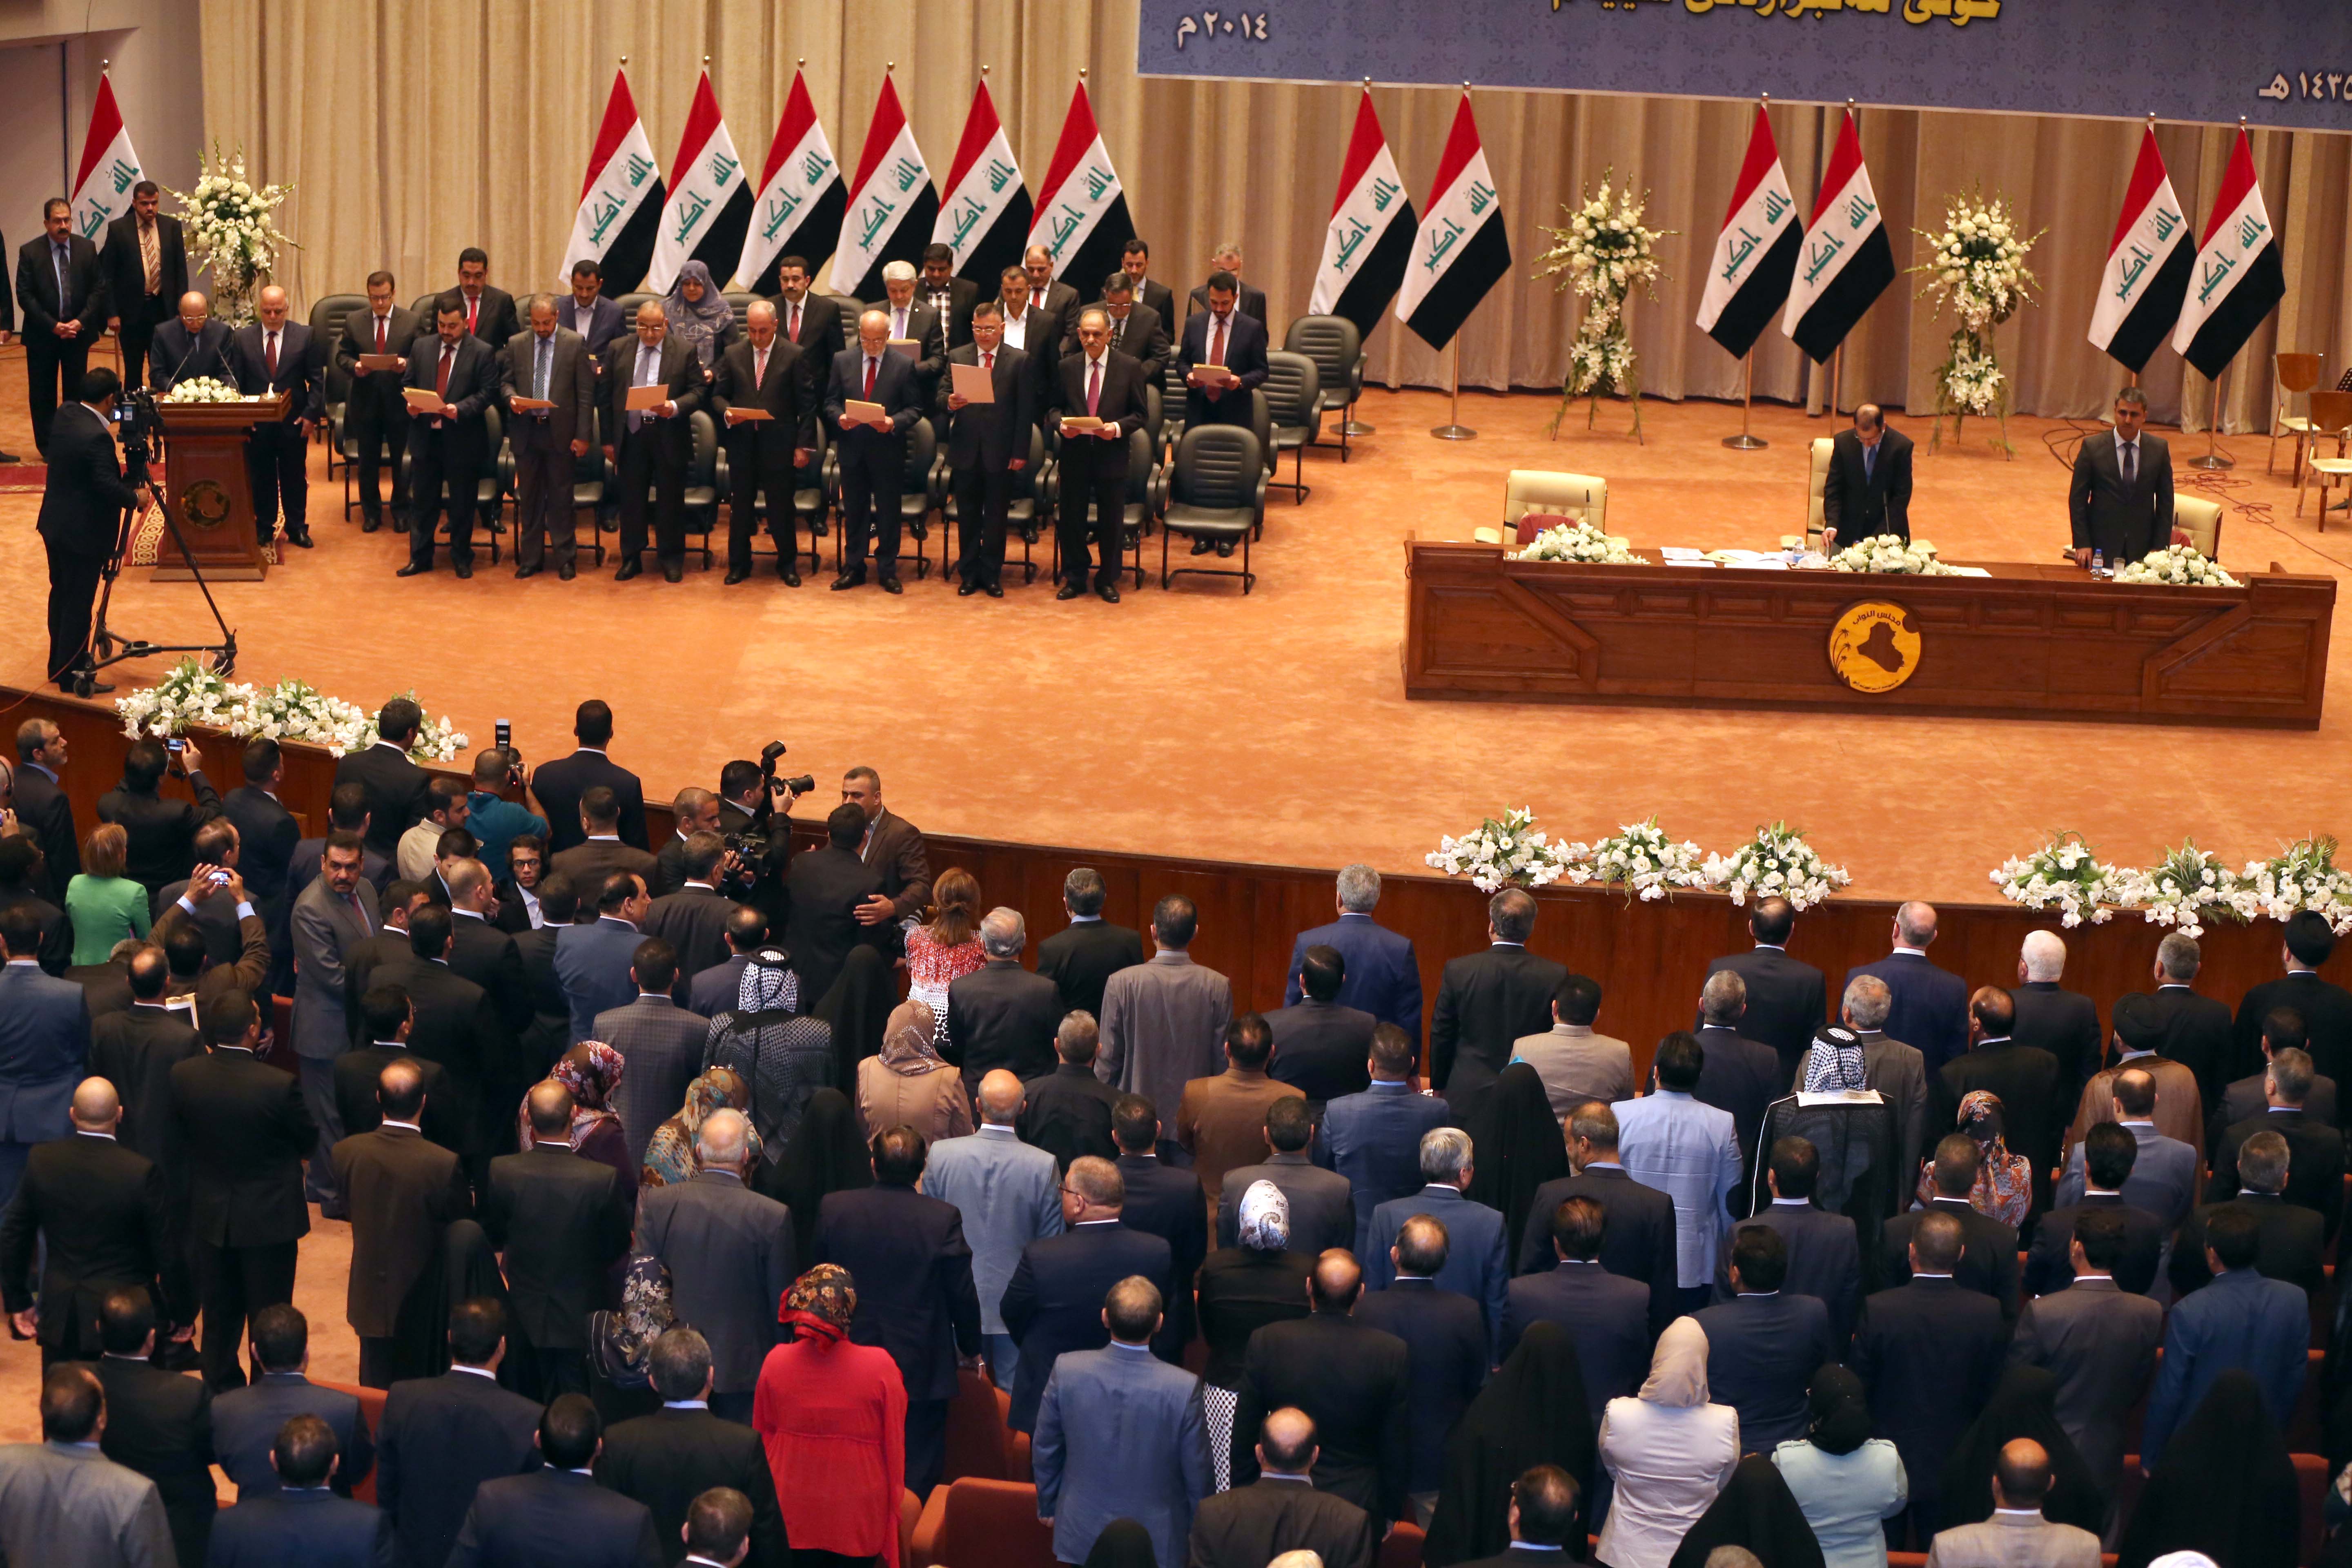 The new Iraqi government is seen during a swearing in ceremony in Baghdad, Iraq, Monday, Sept. 8, 2014. Iraq's parliament officially named Haider al-Abadi the country's new prime minister late Monday and approved most of the candidates put forward for his Cabinet amid mounting pressure to form an inclusive government that can collectively cap the advance of Sunni militants. (AP Photo/Karim Kadim)